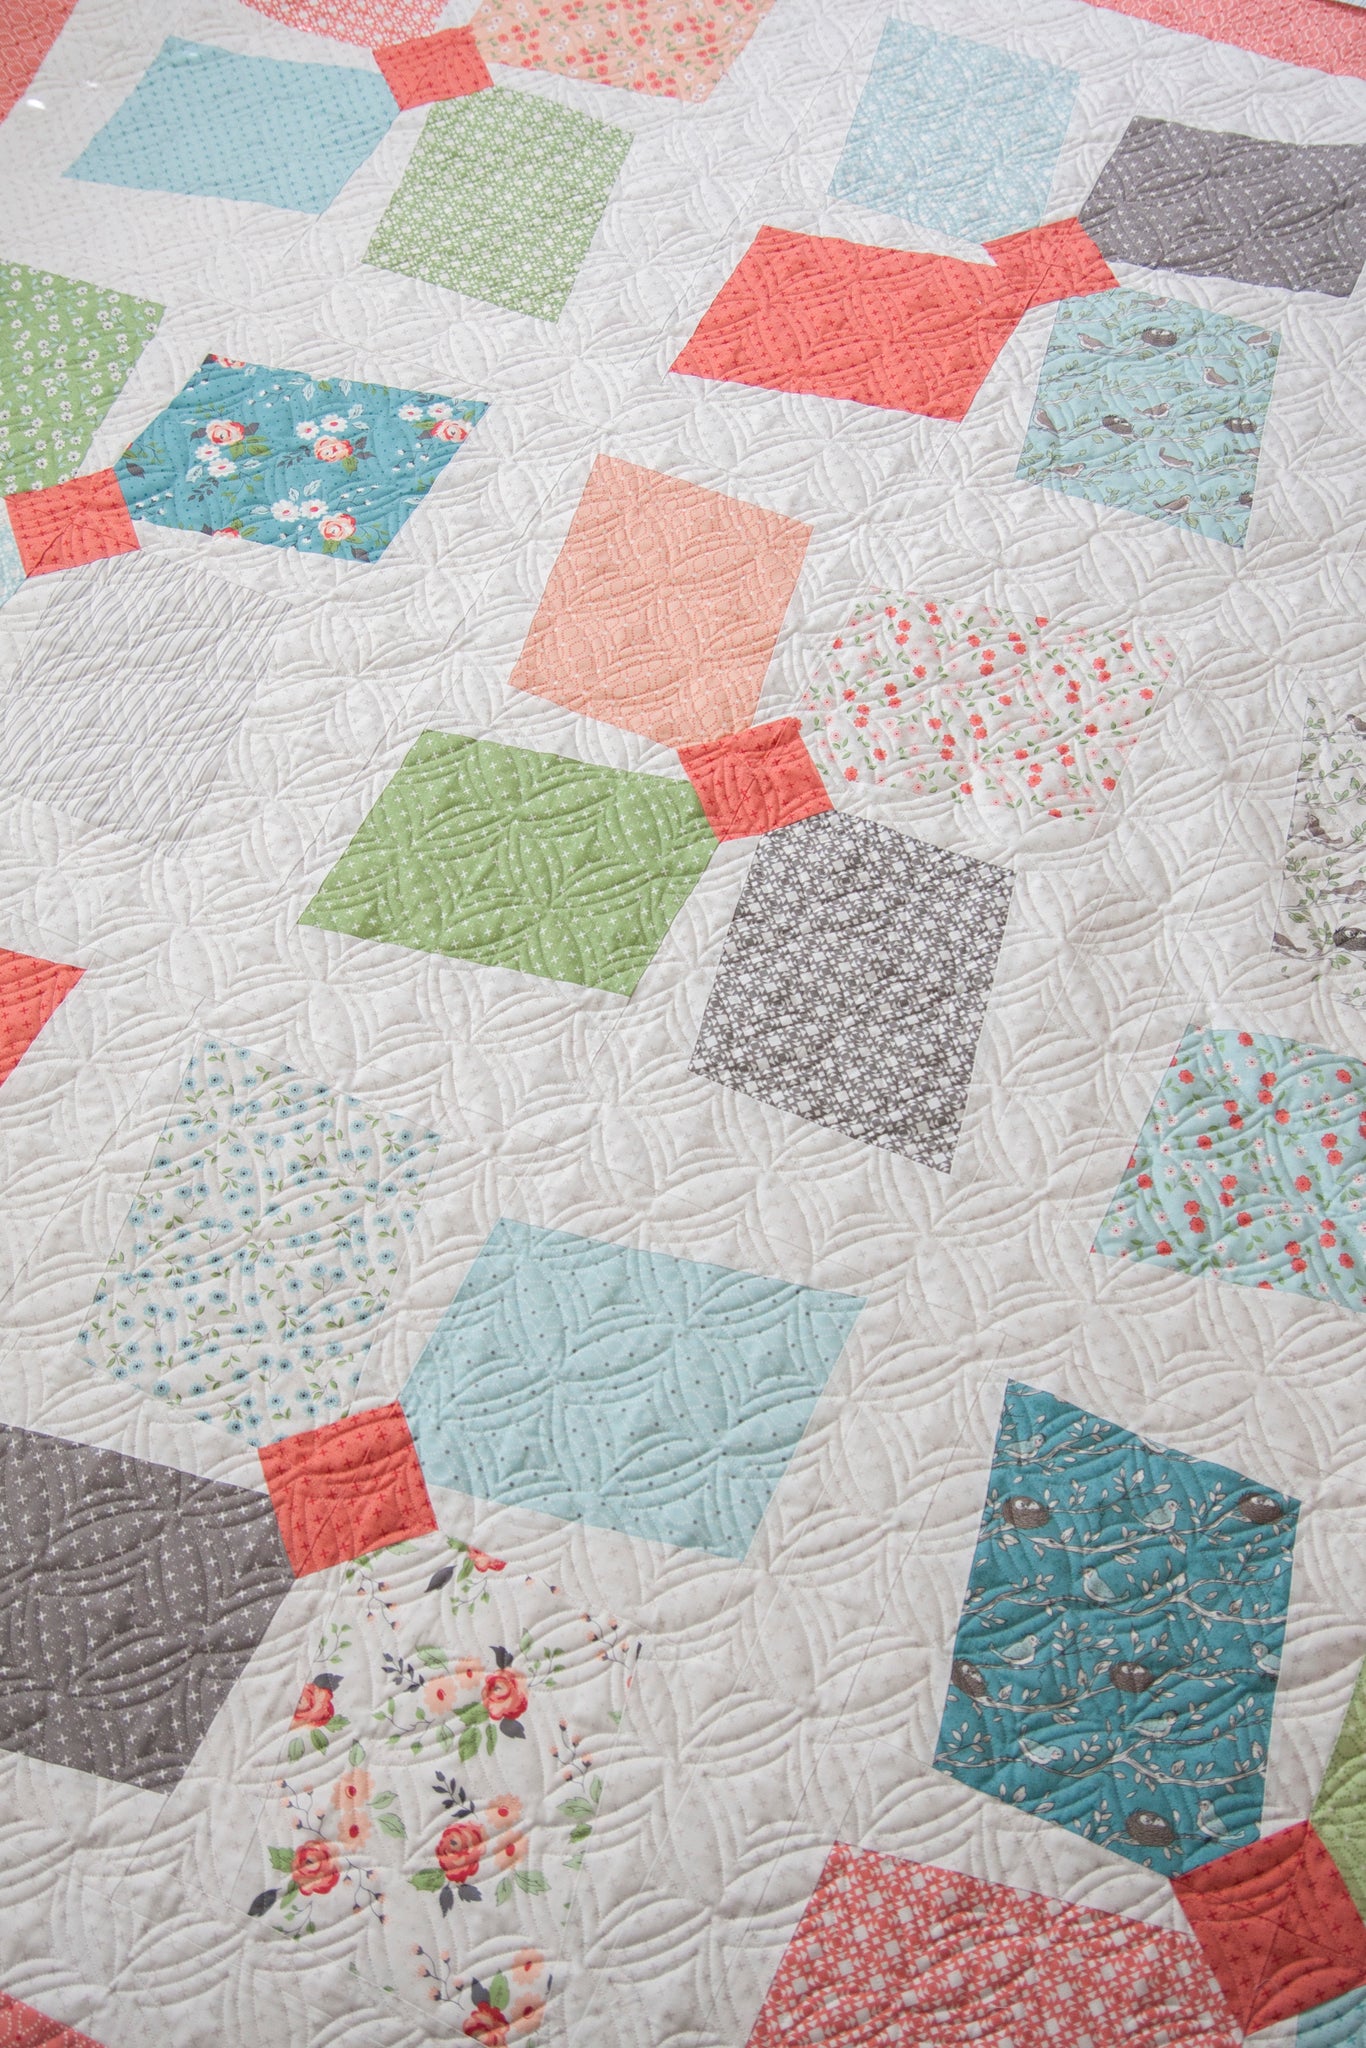 *NEW* Light Breeze Quilt - Fabric Kit with optional template & pattern